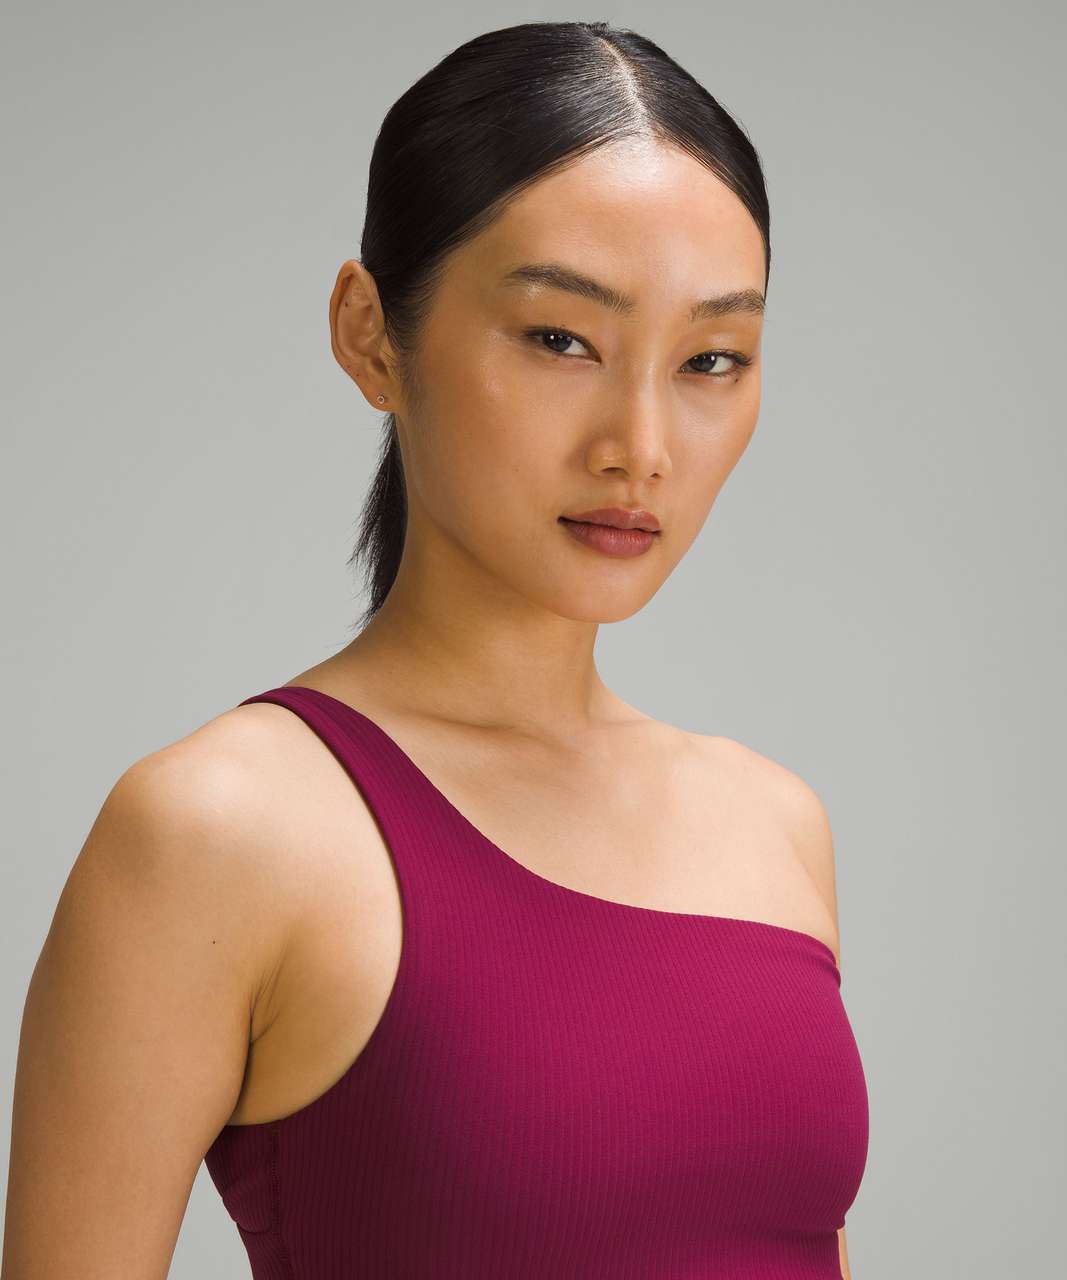 The obsession is still real. Ribbed Nulu Asymmetrical Yoga Bra (6